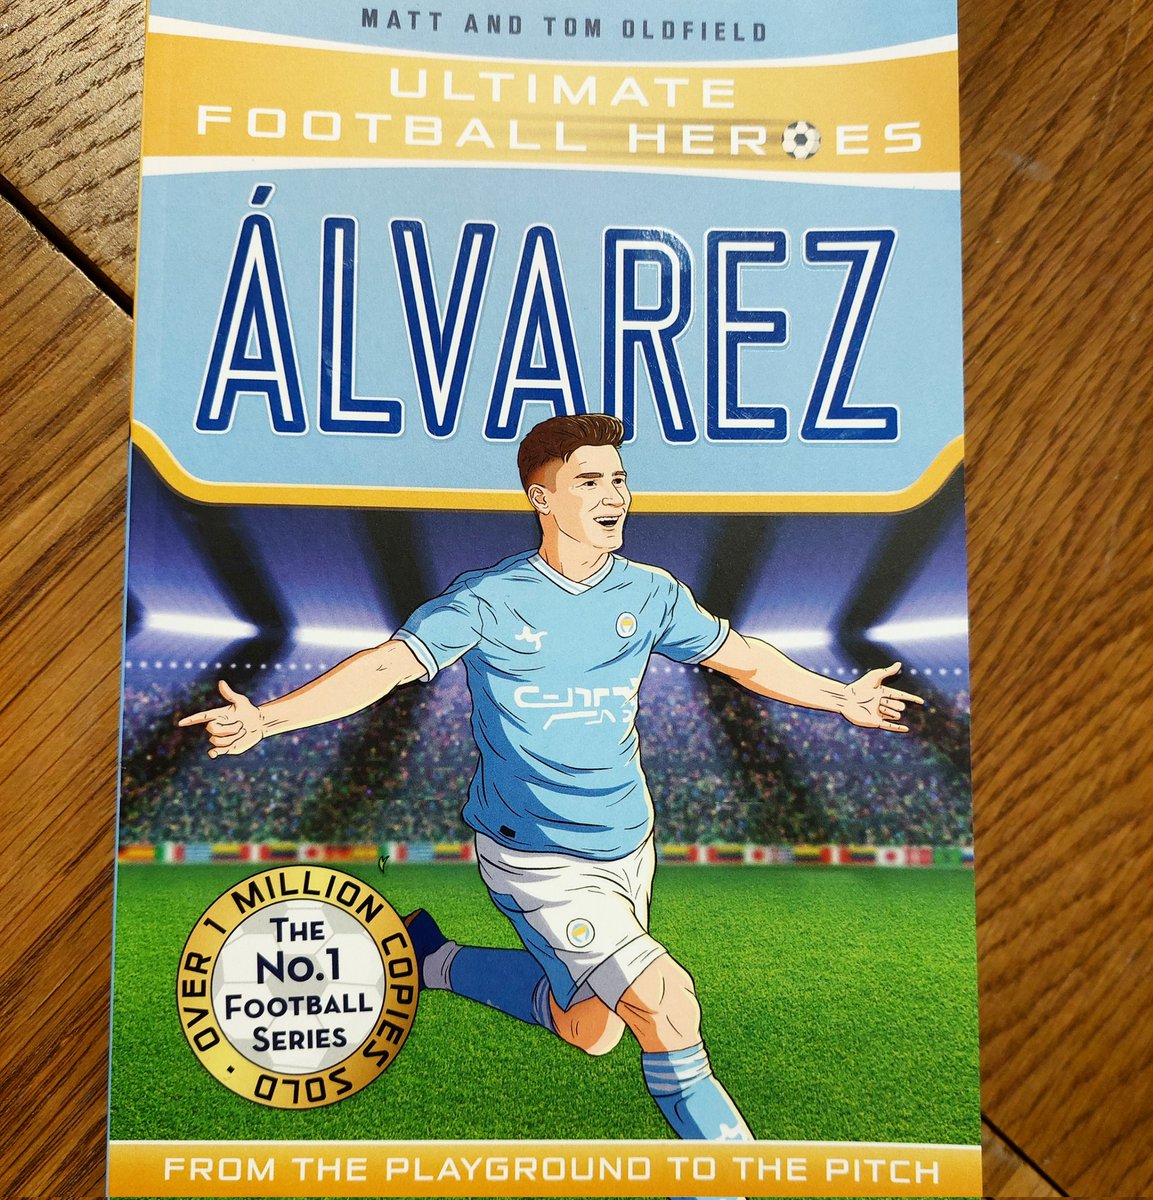 Out today! Julian Alvarez, the latest of our Ultimate Football Heroes